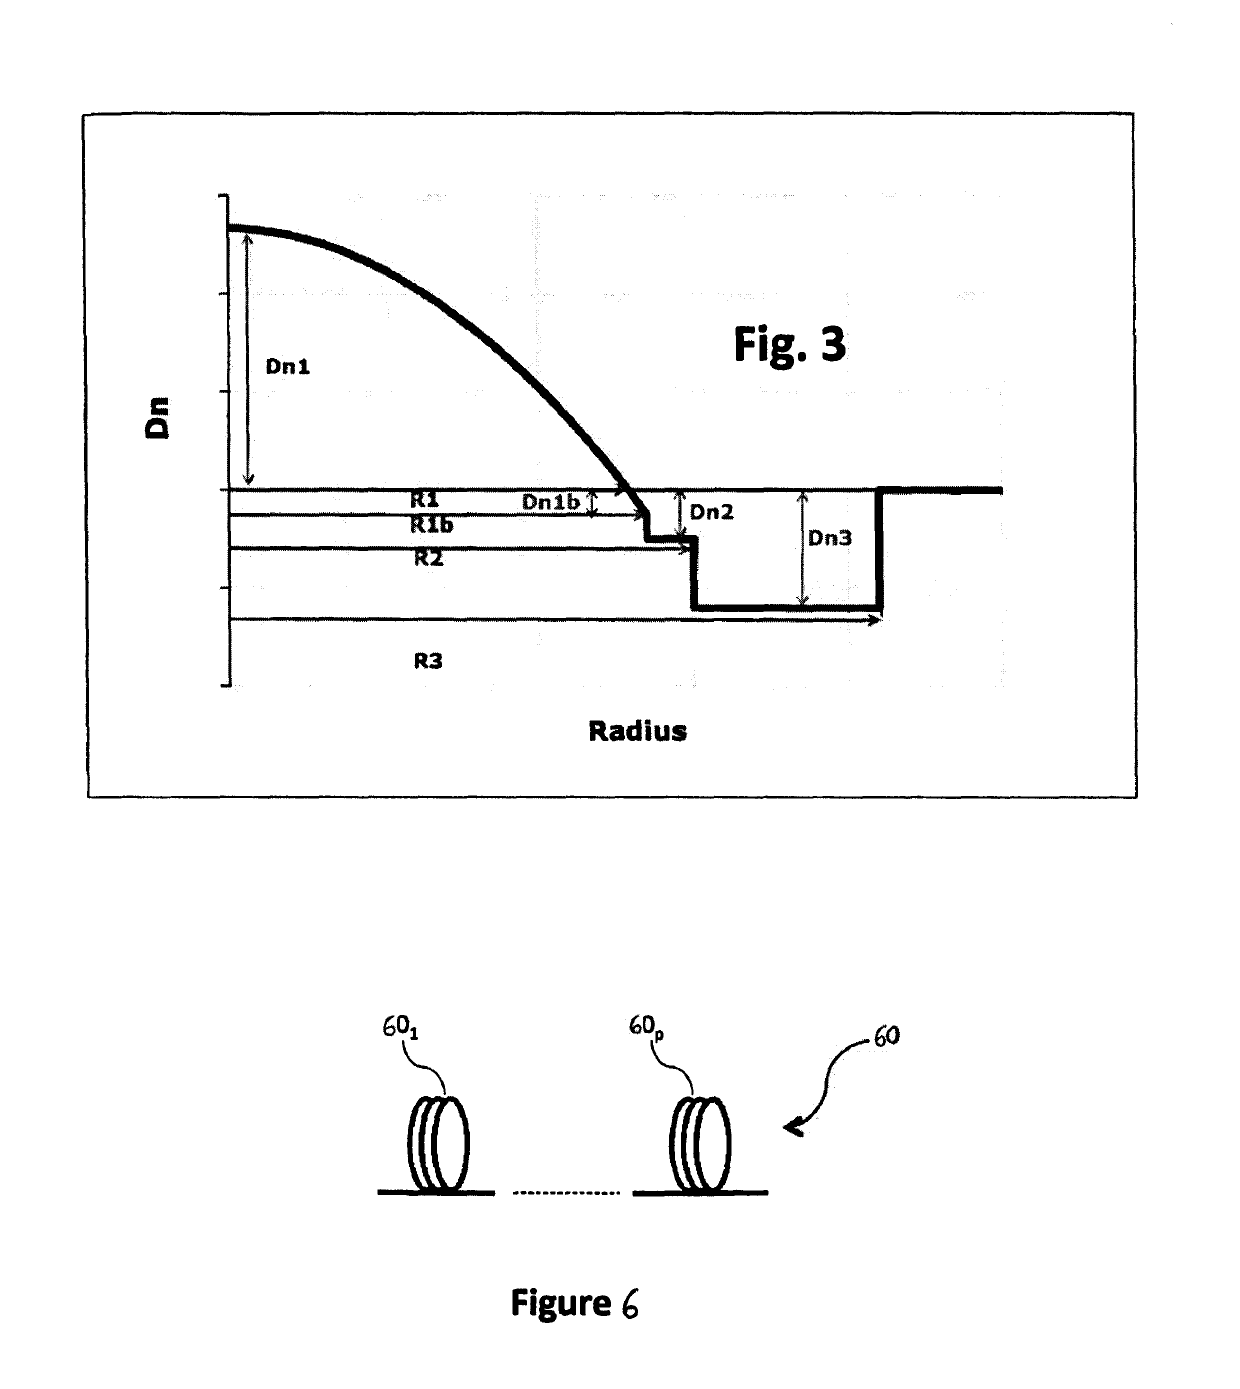 Few mode optical fibers for mode division multiplexing having intermediate trenches